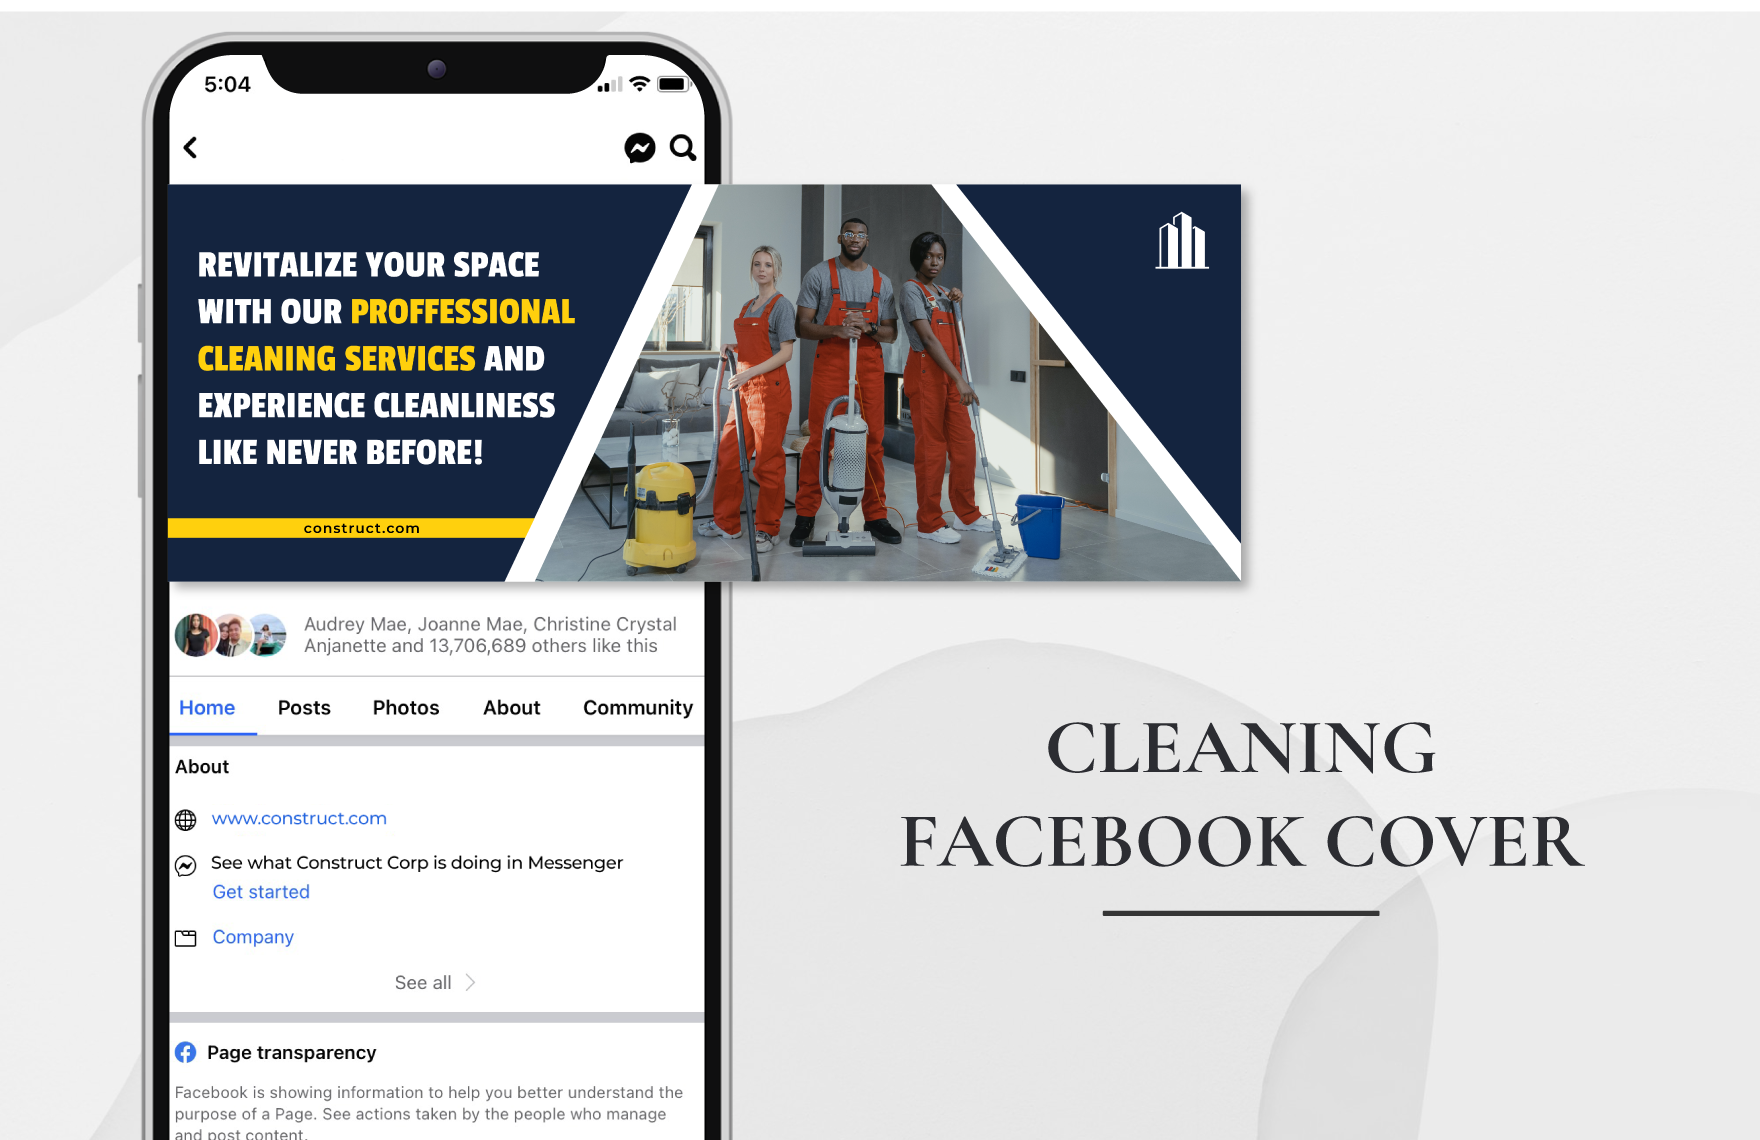 Cleaning Facebook Cover